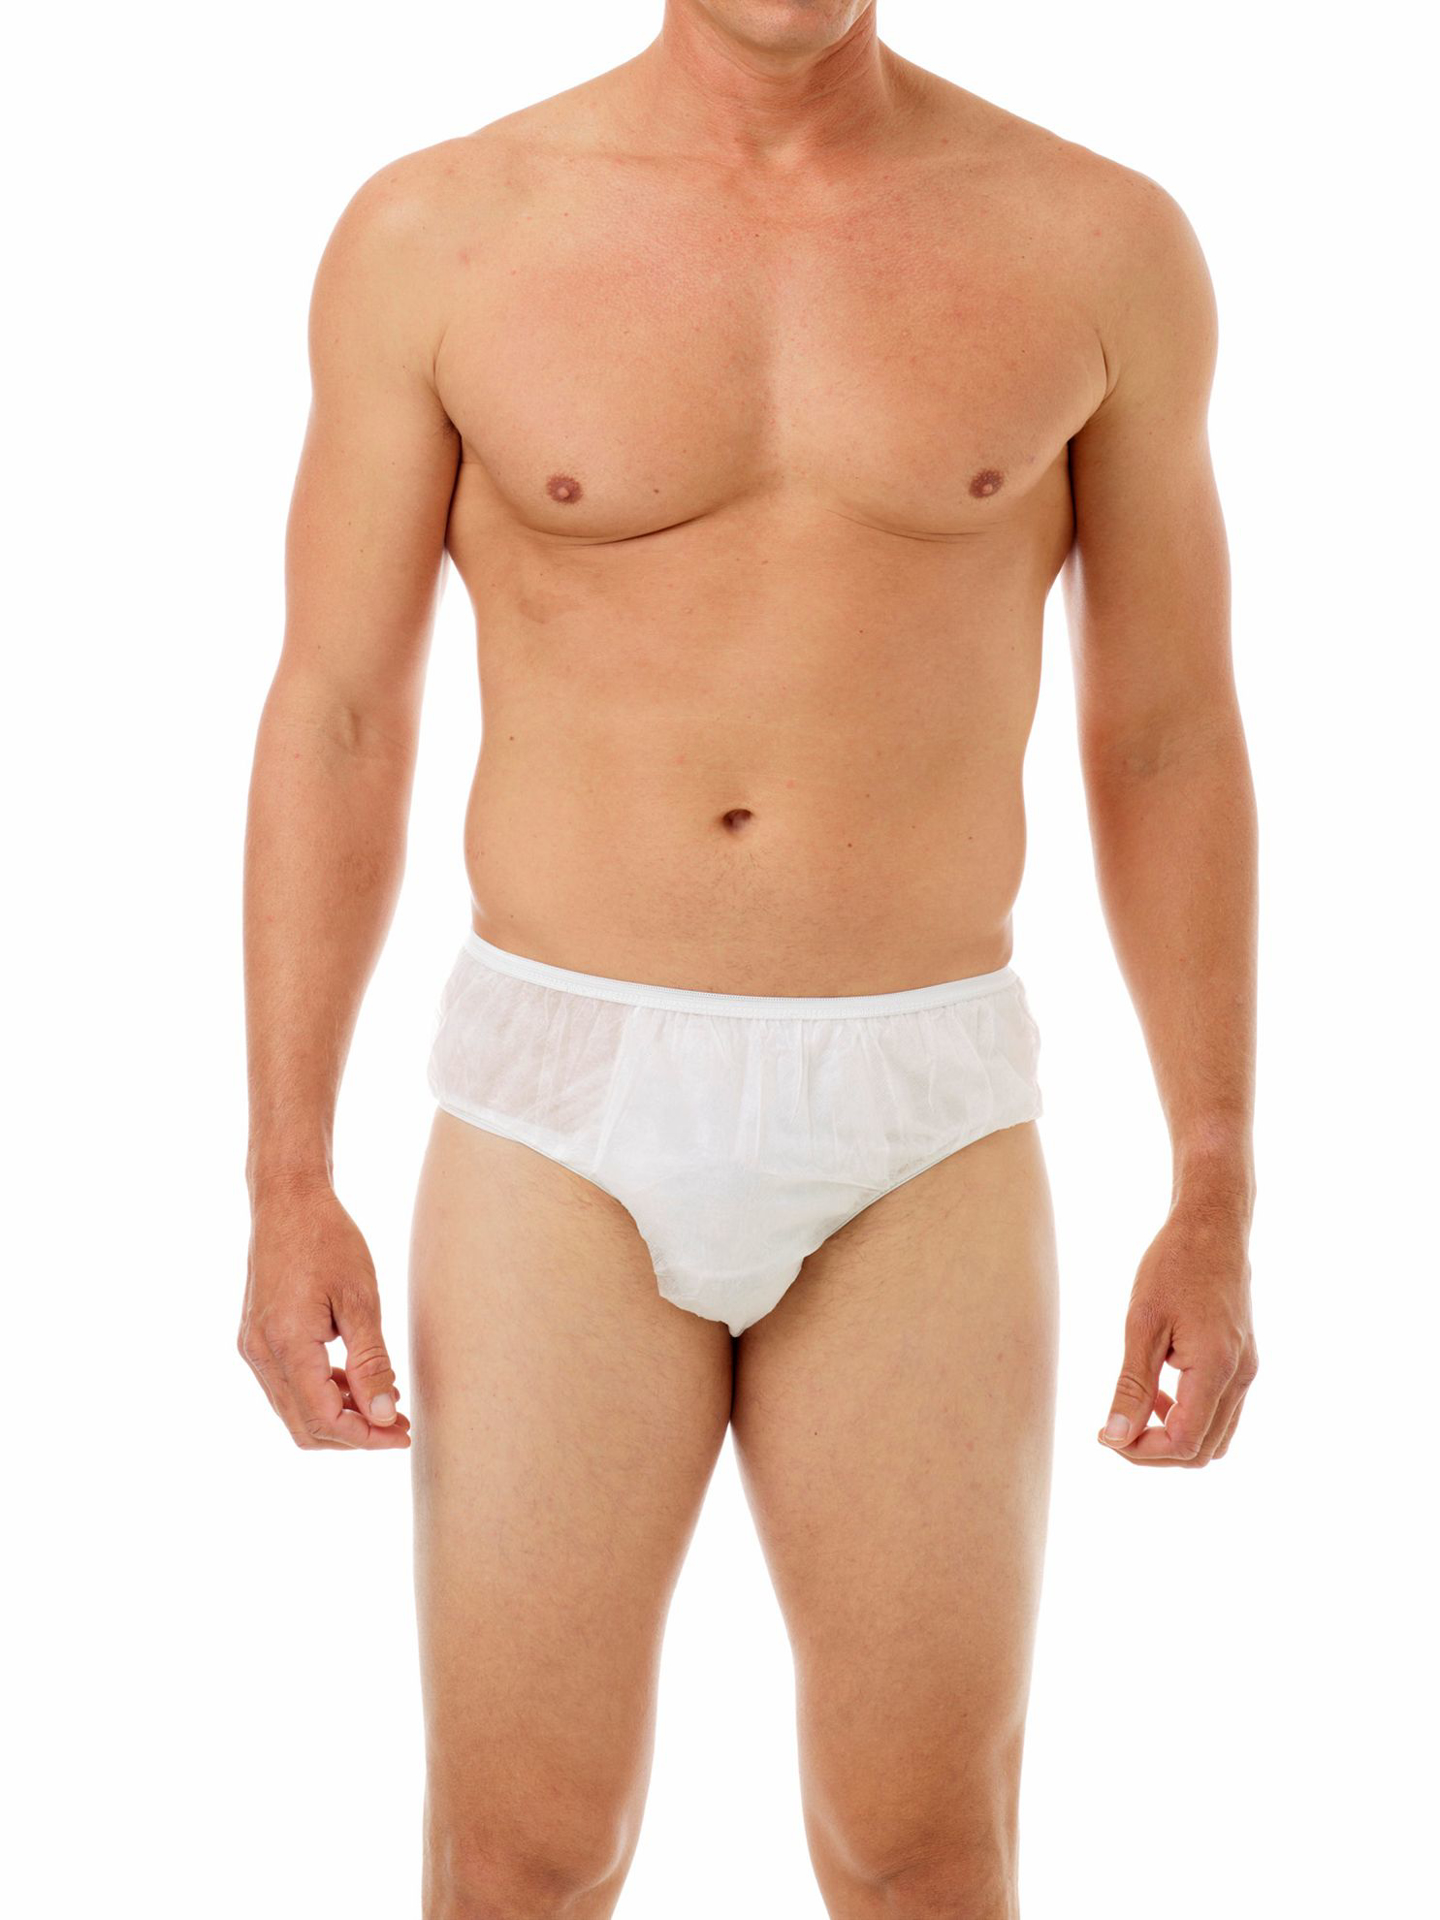 Men's Cotton Disposable Underwear Great For Travel, 57% OFF